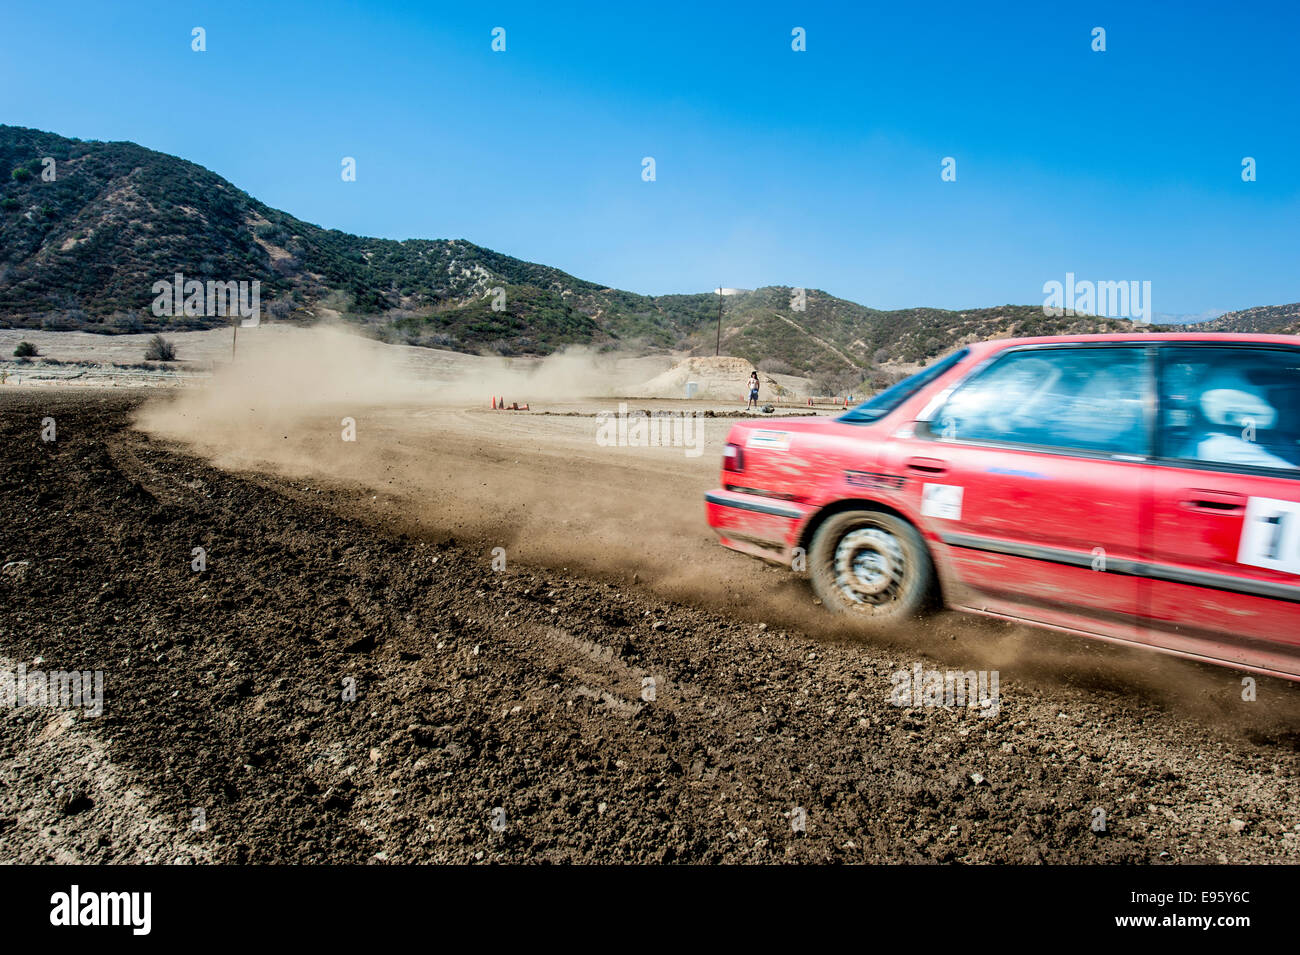 Glen Helen, California, USA. 19th Oct, 2014.  Motorsport is a very popular pastime in the USA. RallyCross is the most widespread extreme dirt motorsport. One of many competitions organized by the Sports Car Club of America took place this Sunday on Glen Helen racing course near the San Bernardino Mountains in Southern California. Alla participating vehicles are street legal and the majority of drivers are amateurs. Some drivers are younger than the cars they drive. A lot of noise, dust and adrenaline. Credit:  Henryk Kotowski/Alamy Live News Stock Photo